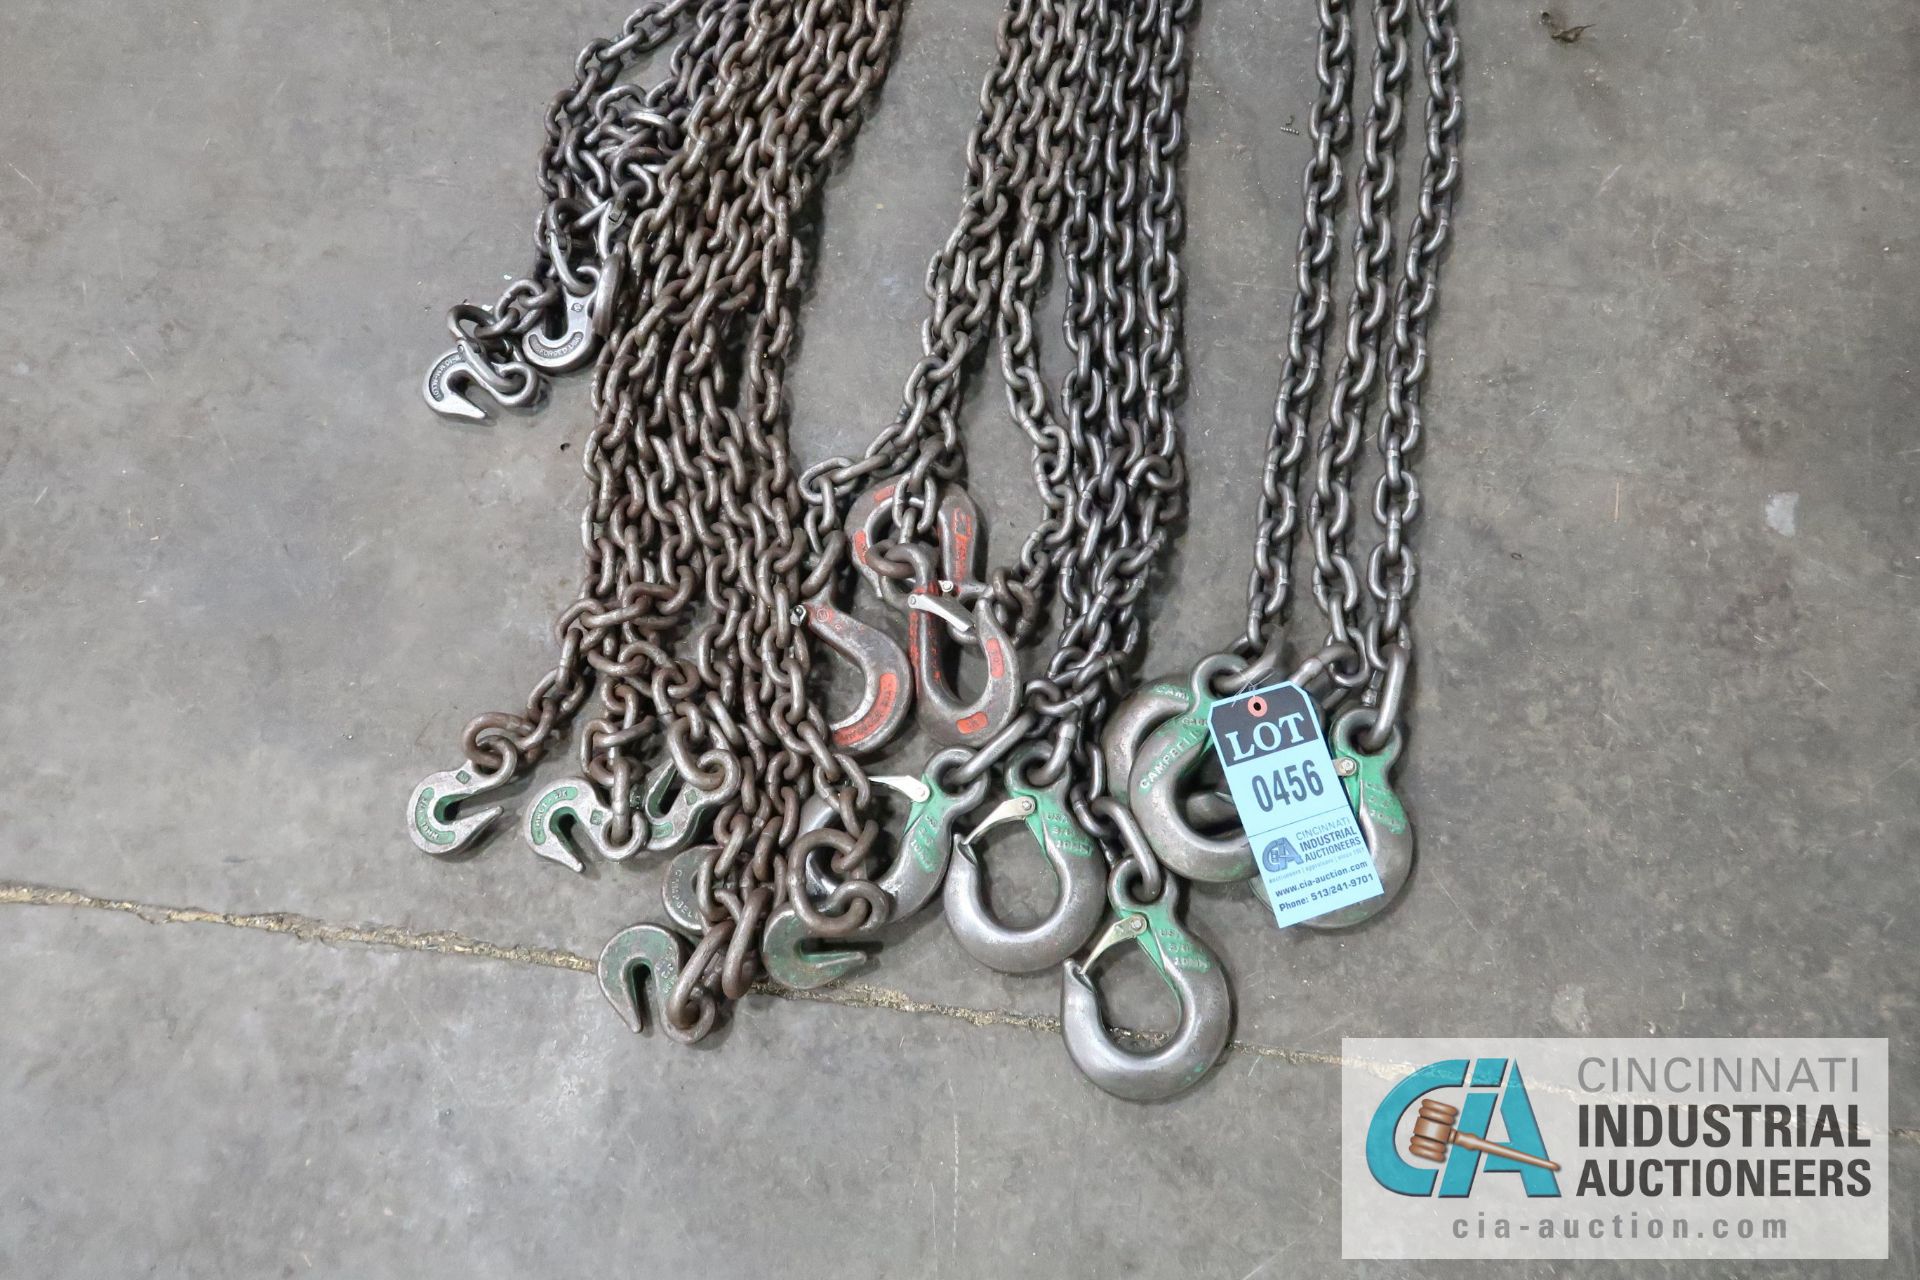 10 FT. 3-HOOK CRANE CHAINS - Image 2 of 3